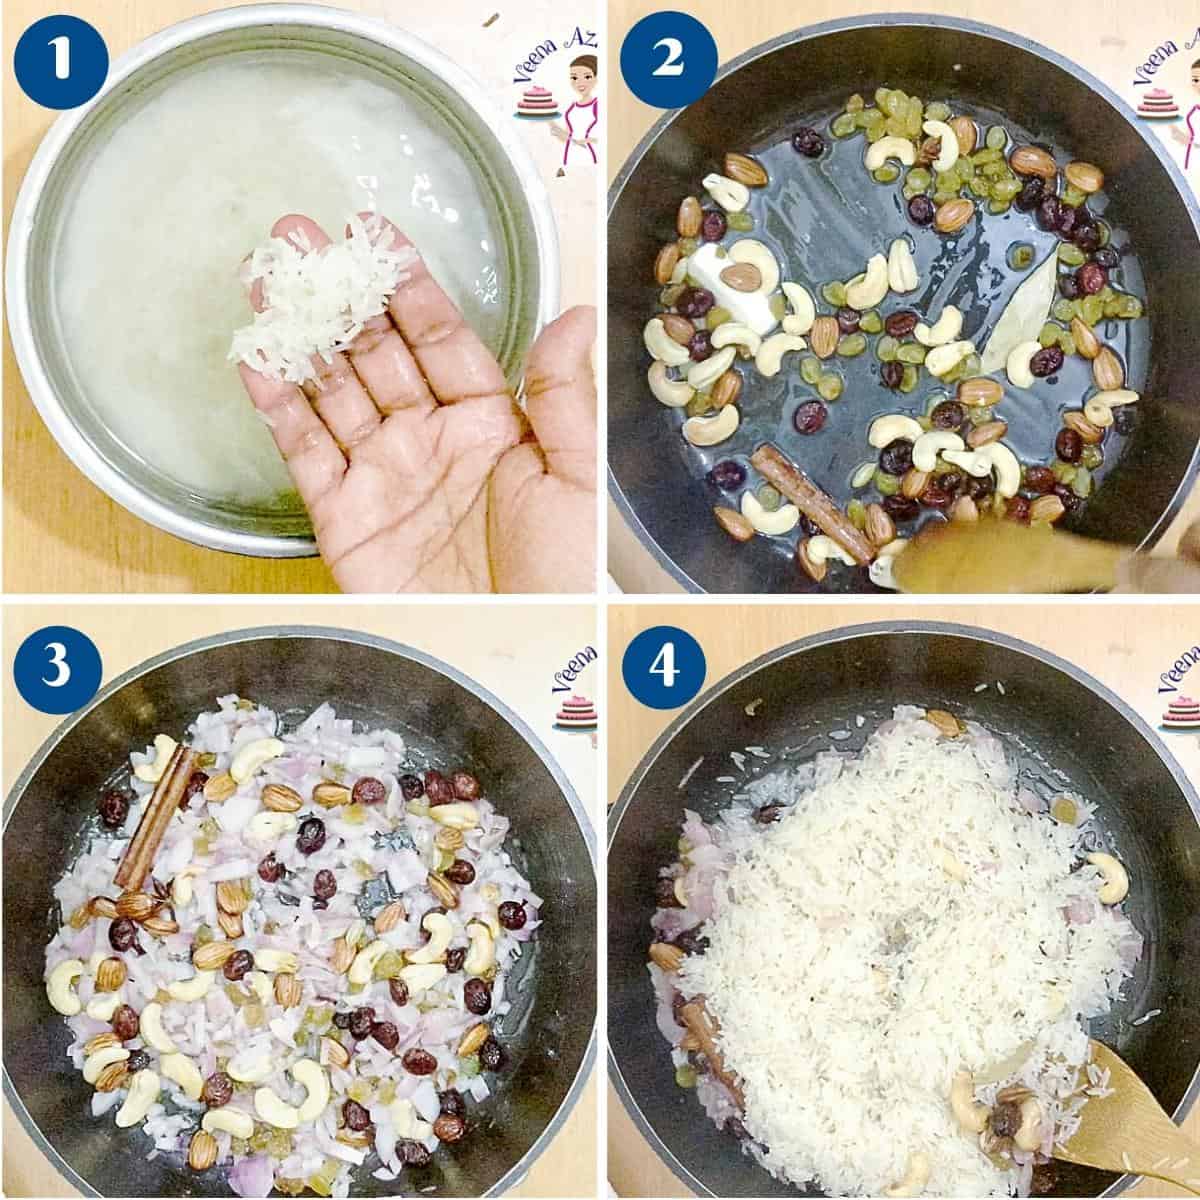 Progress pictures saute the rice with fruit and nuts.